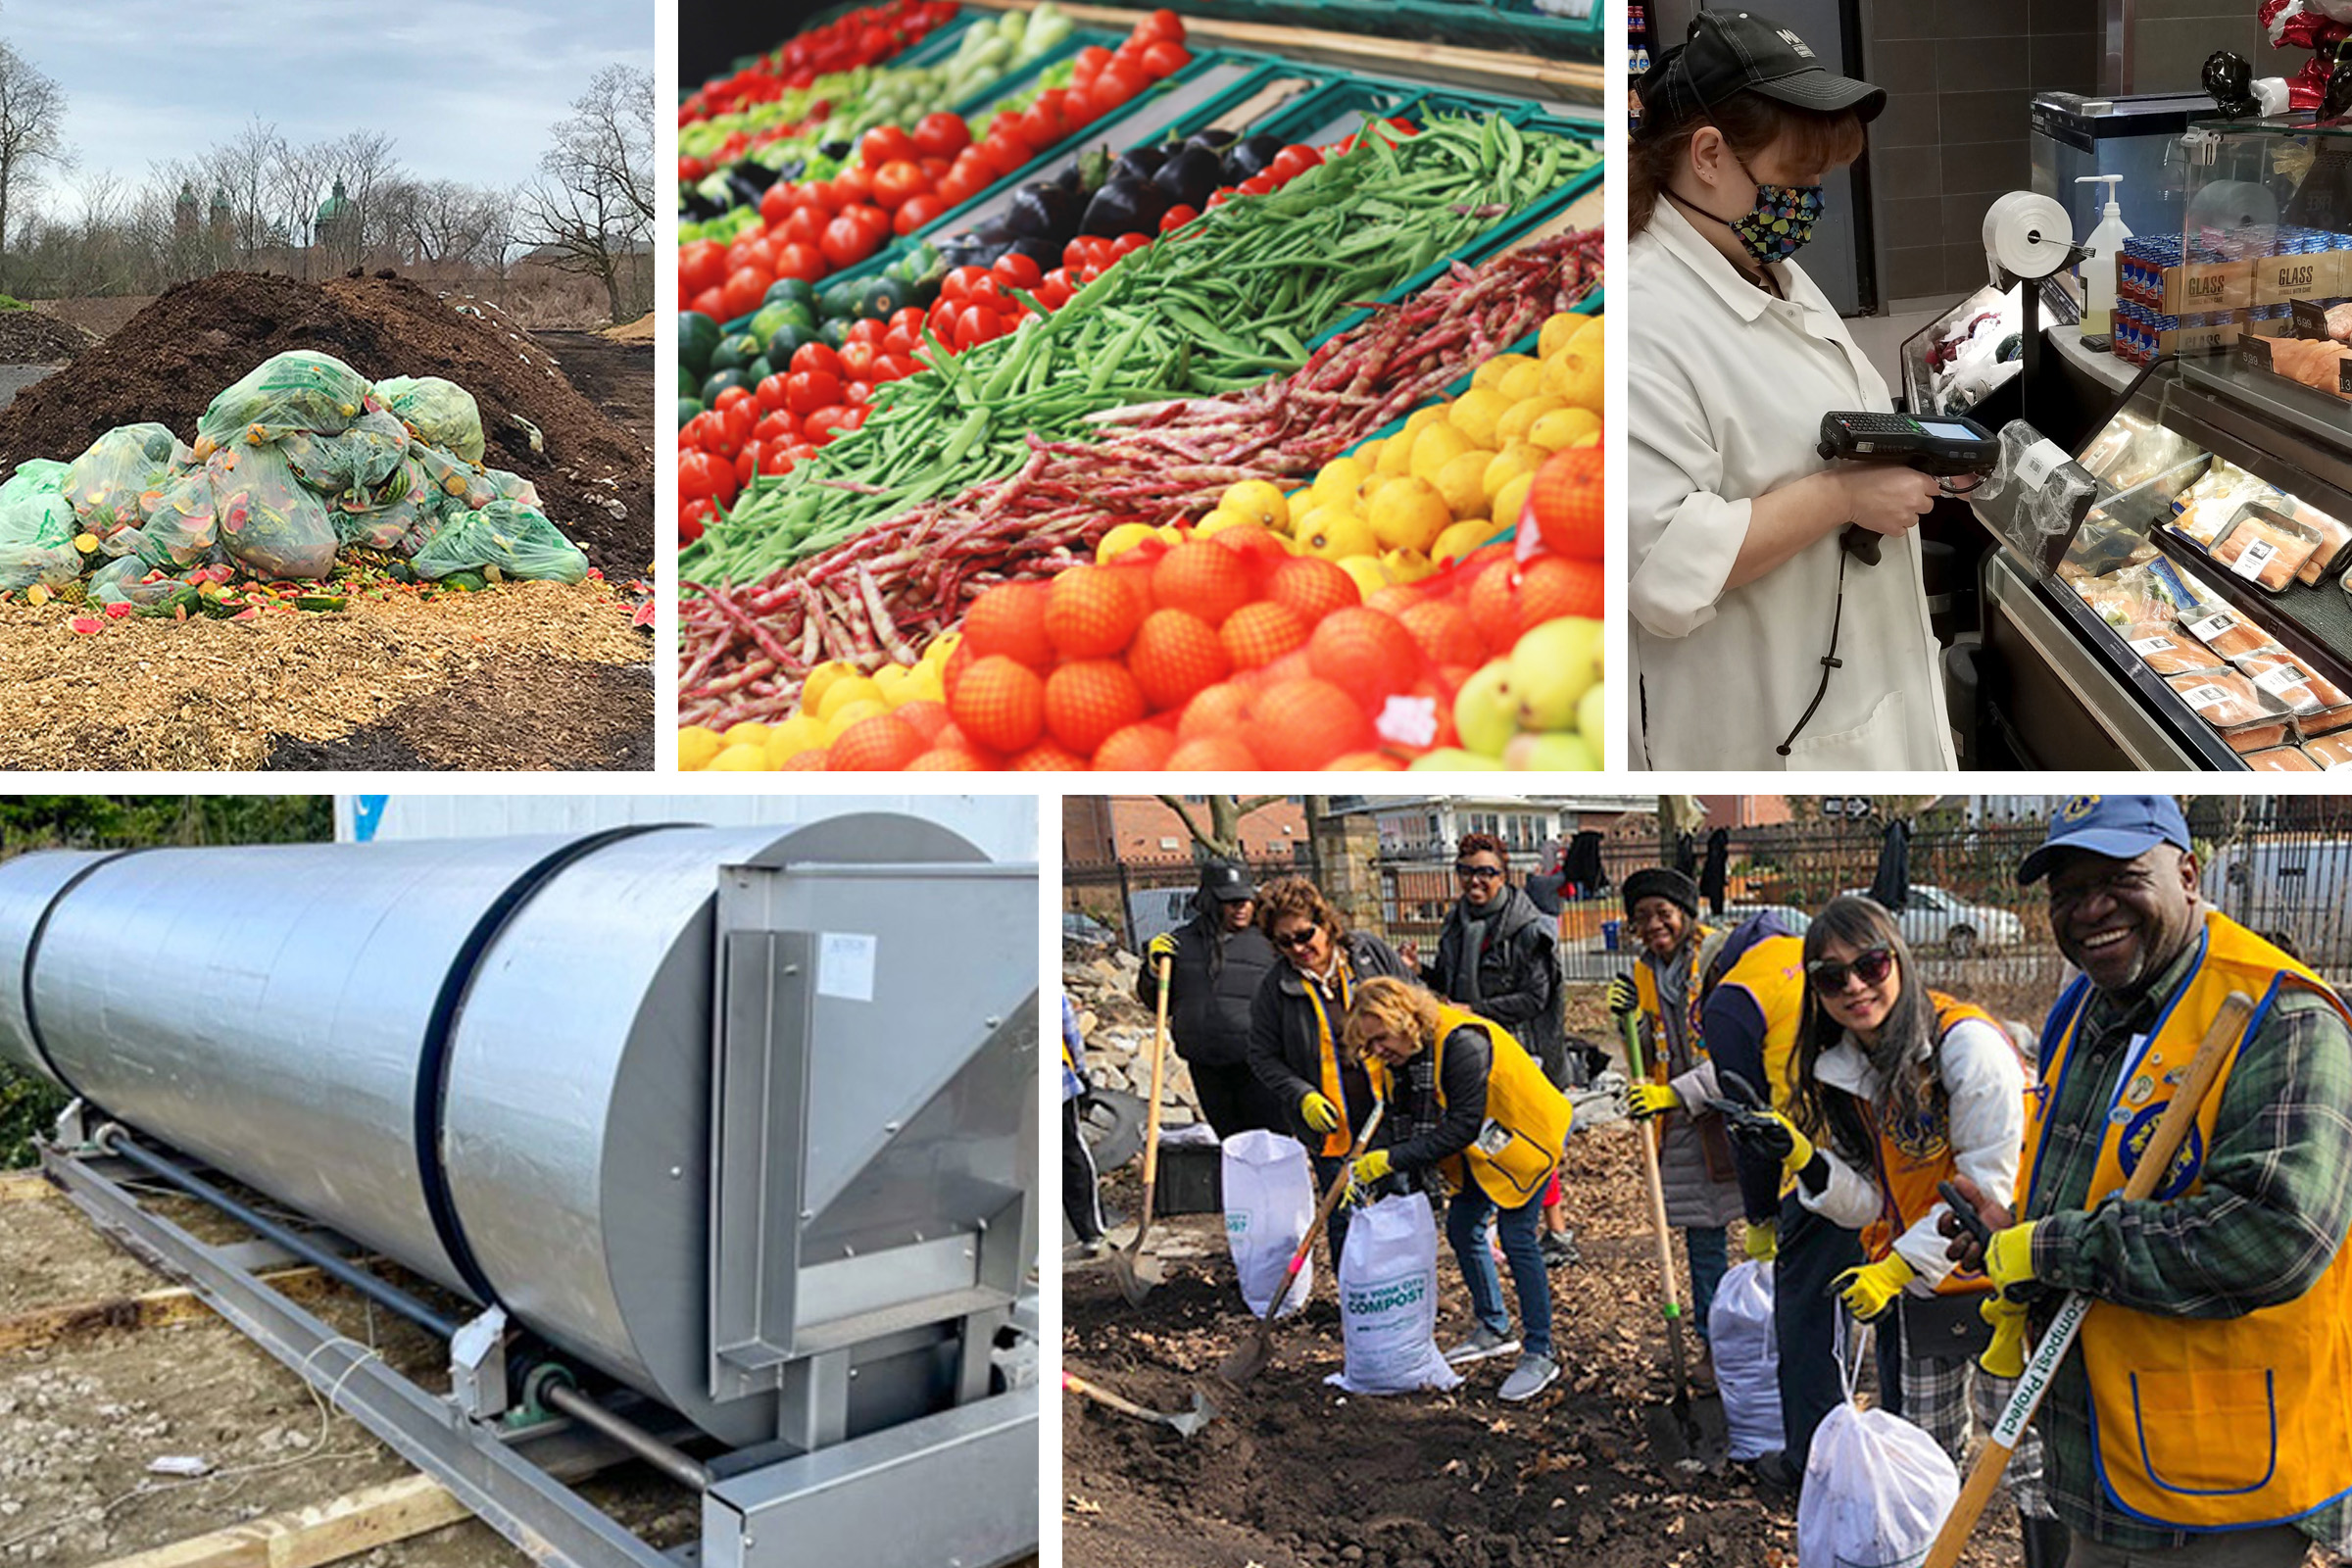 A composite grid of photos showing (from top left, clockwise) food waste, fresh produce, a grocery store worker, an anaerobic digester, and a group of people doing yard work. 